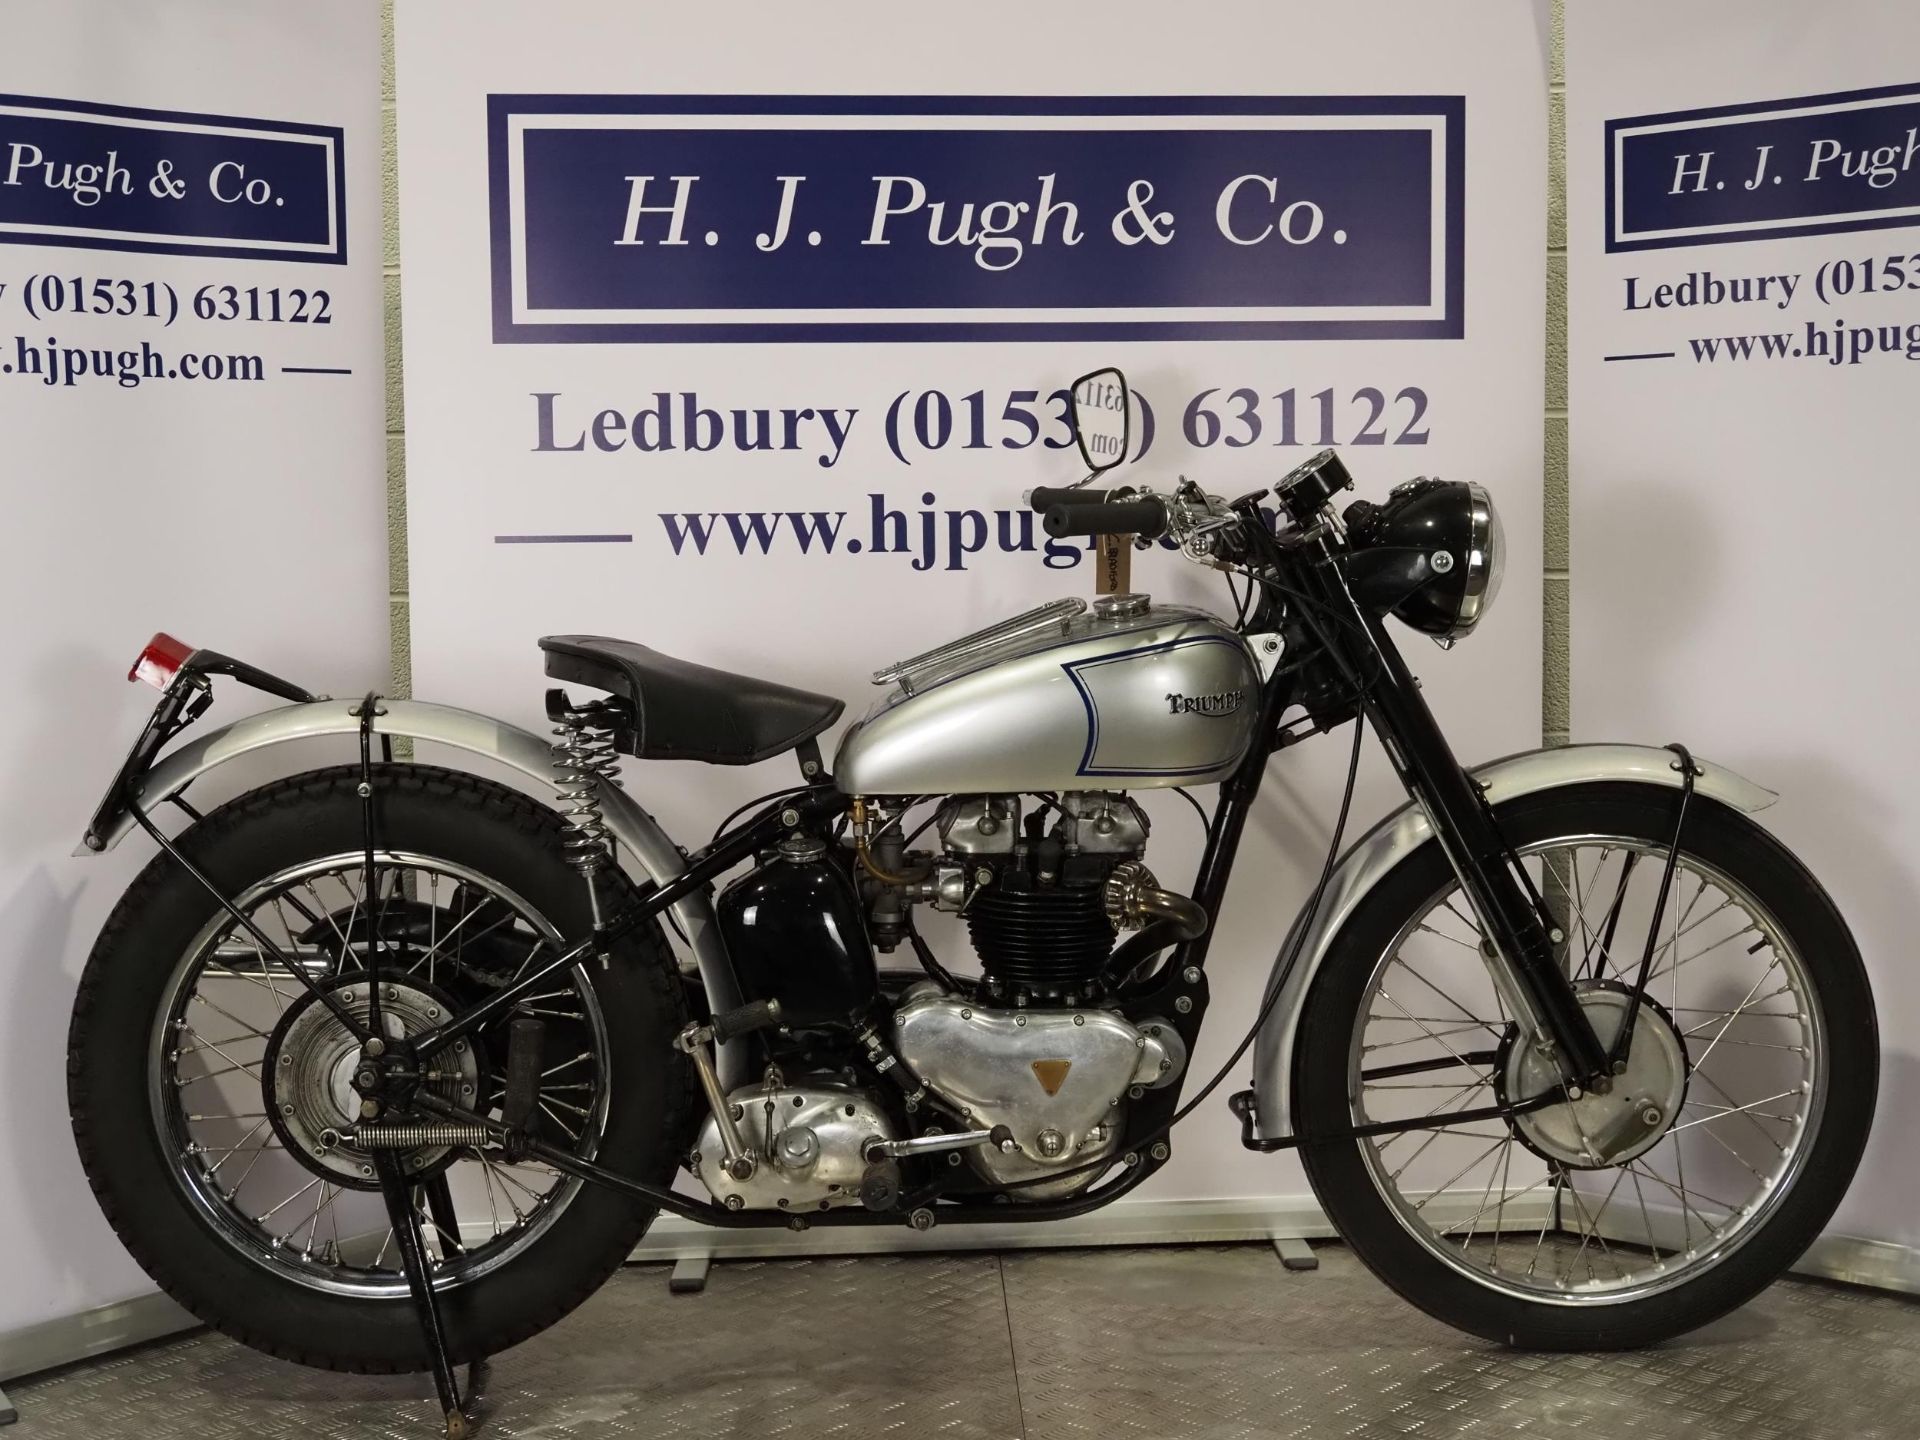 Triumph Trophy 6T motorcycle. 1953. 650cc. Frame No. 39335 Engine No. 6T32170 Rims and rides.